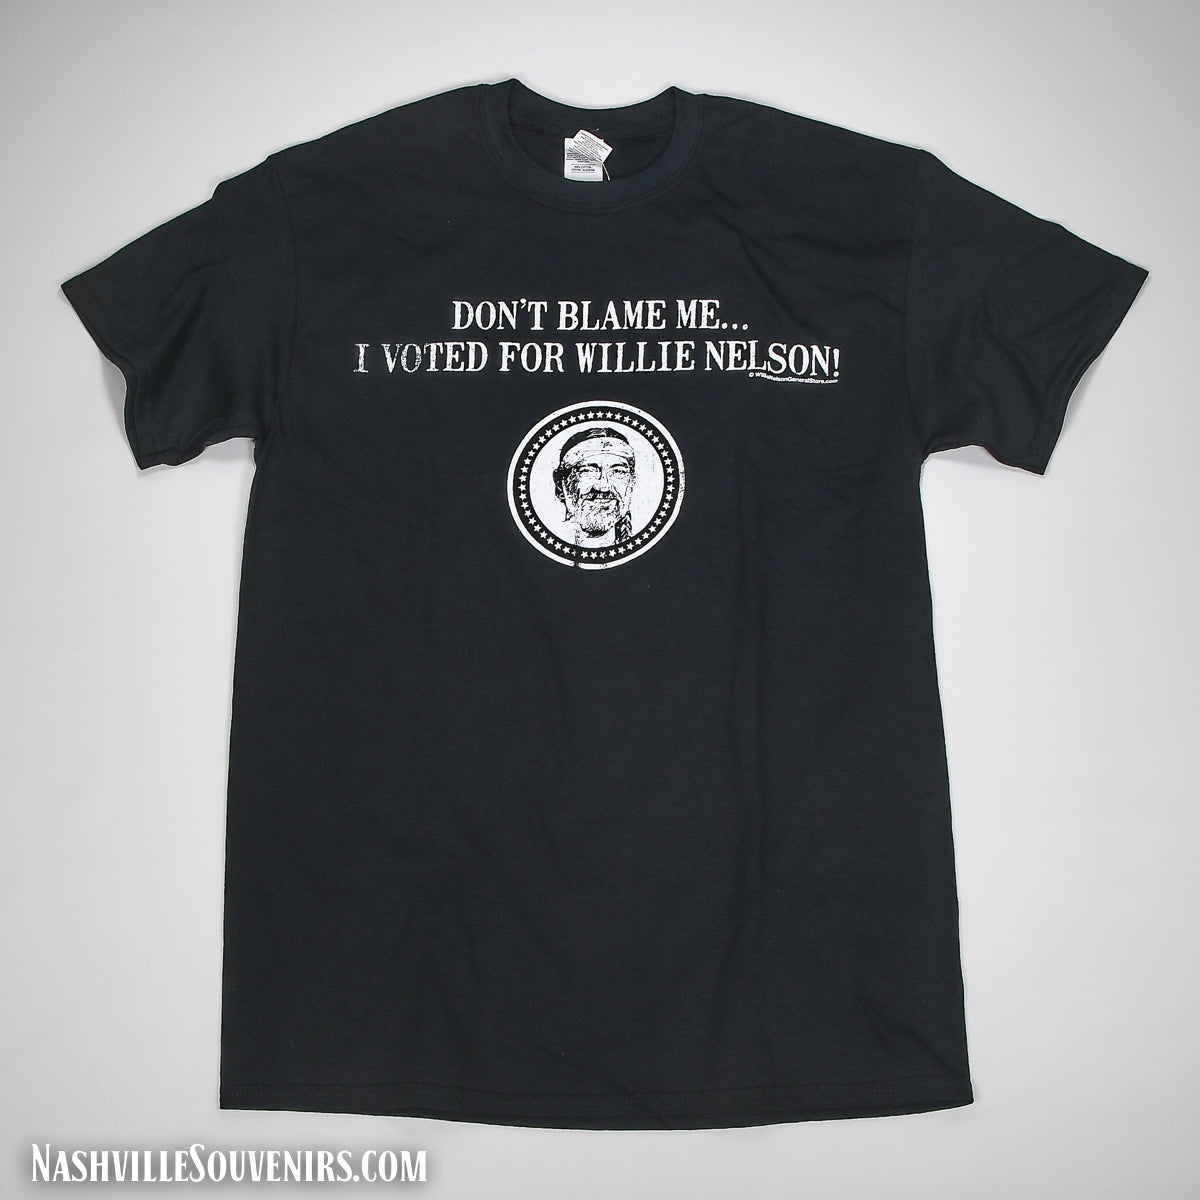 The famous "Don't Blame Me...I Voted For Willie Nelson" T-Shirt.